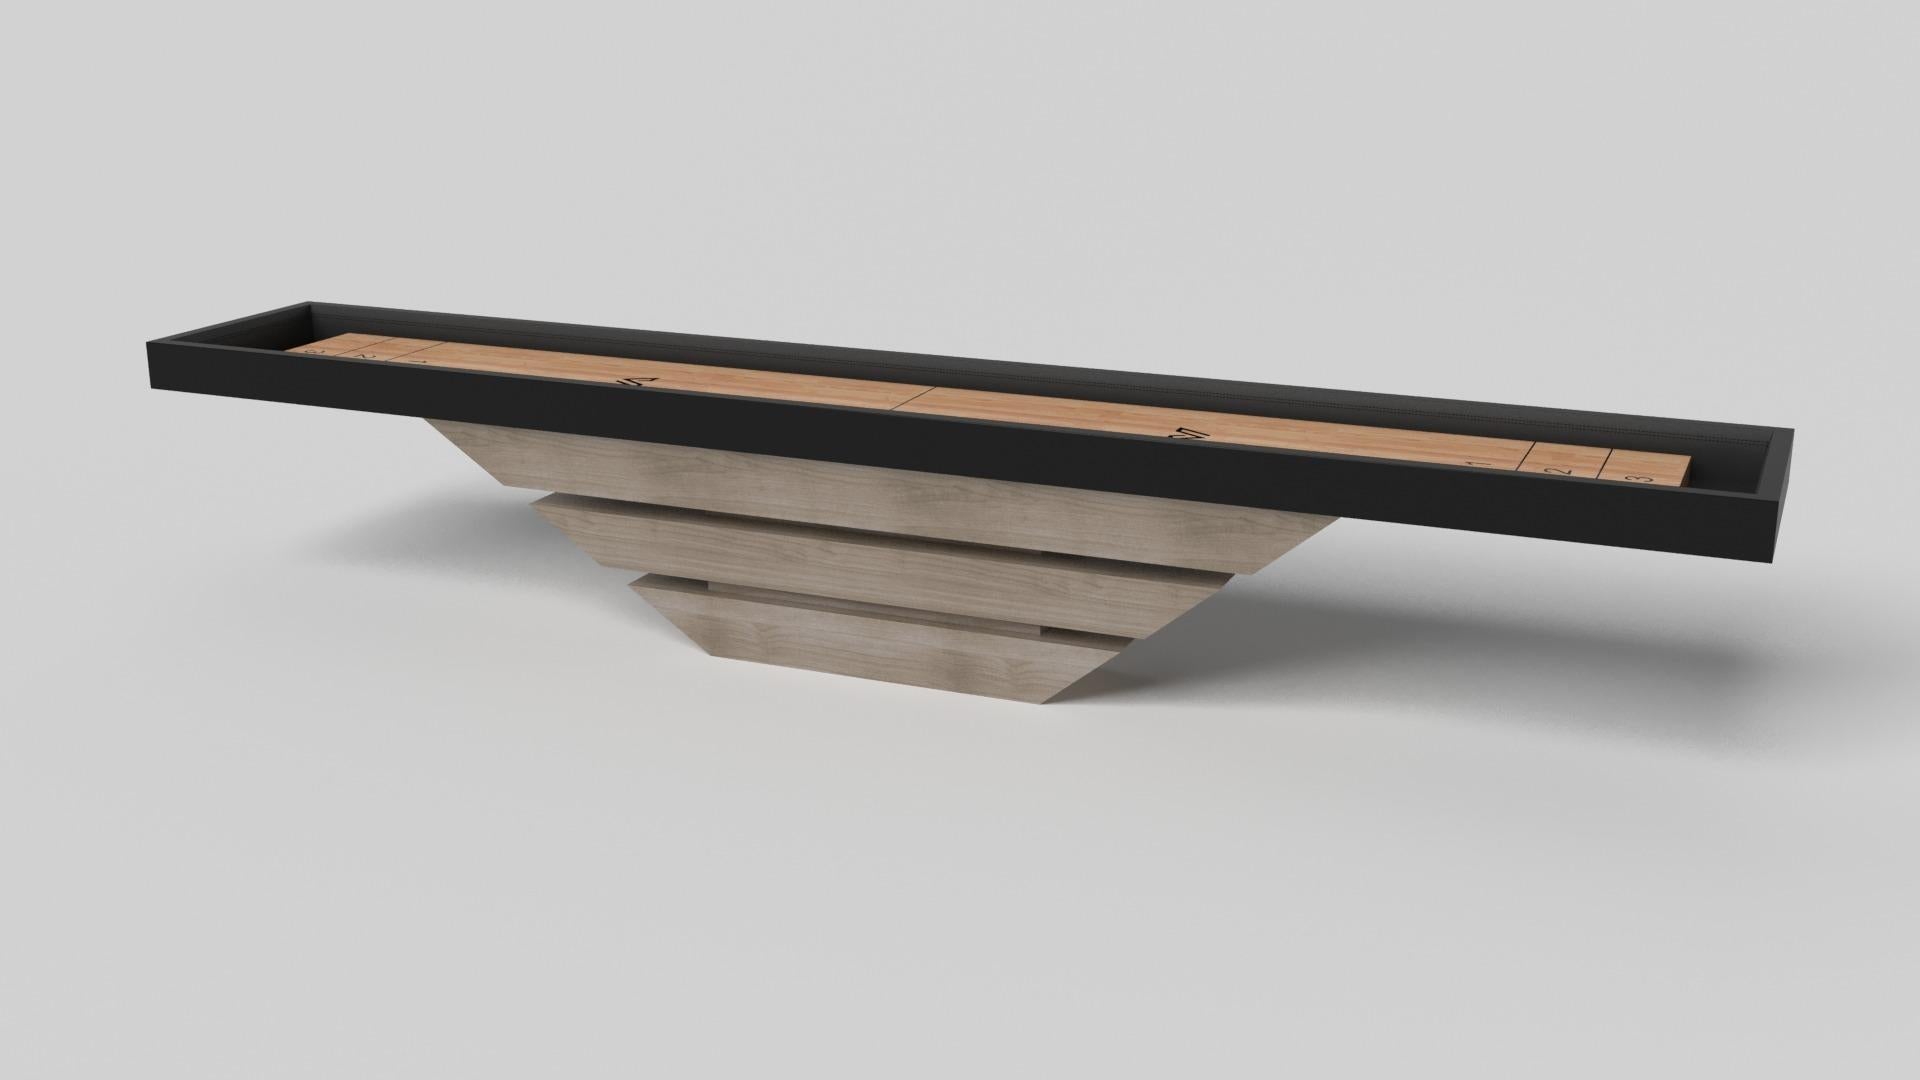 Three solid pieces of wood seemingly float around a concealed center base, making the Louve shuffleboard table in chrome one of our most mind-bending designs. Crafted from solid maple wood and detailed with a smooth professional grade Maple wood